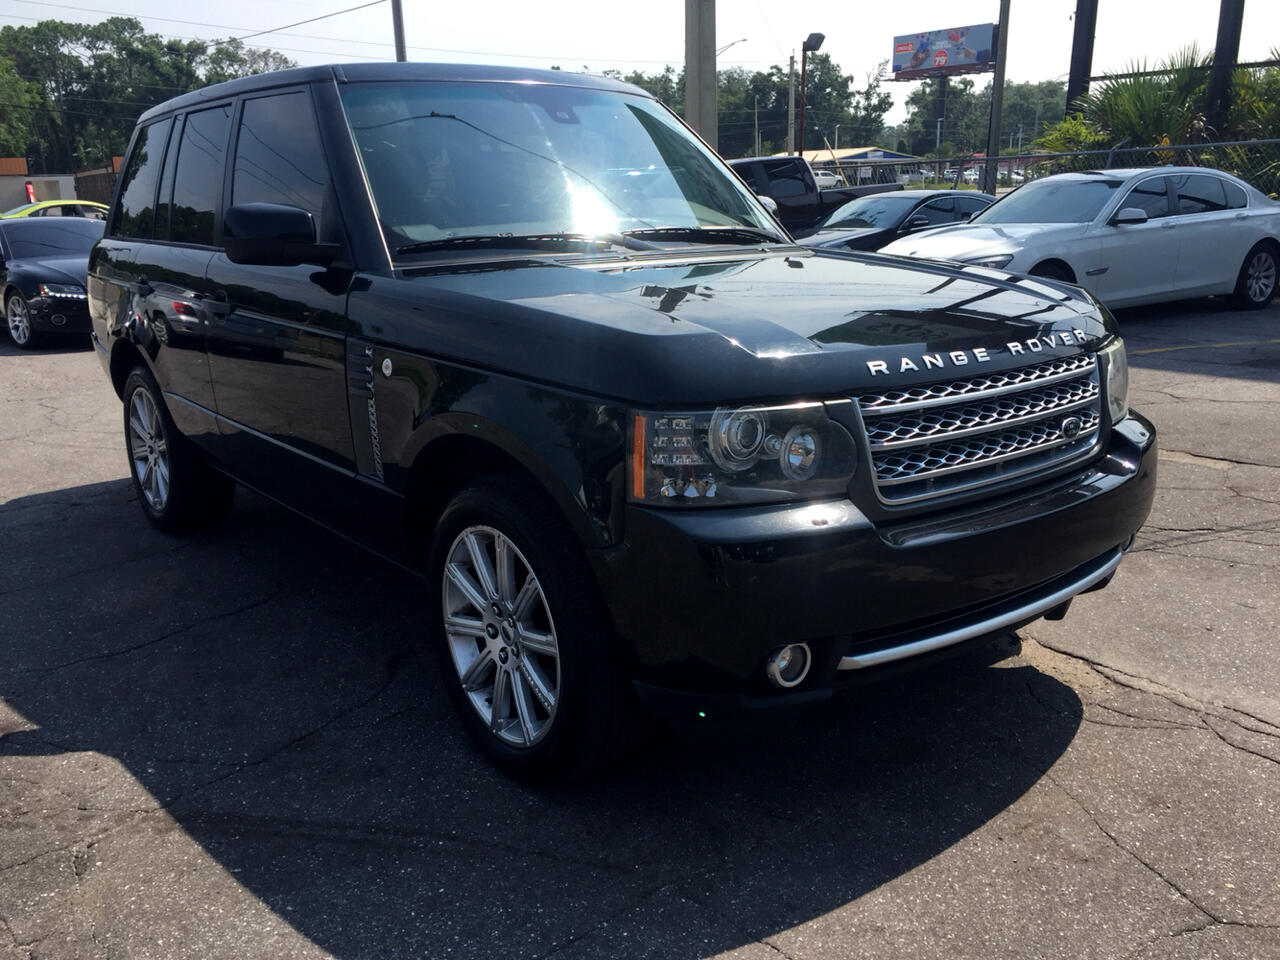 Used 2010 Land Rover Range Rover Supercharged for Sale in Jacksonville ...